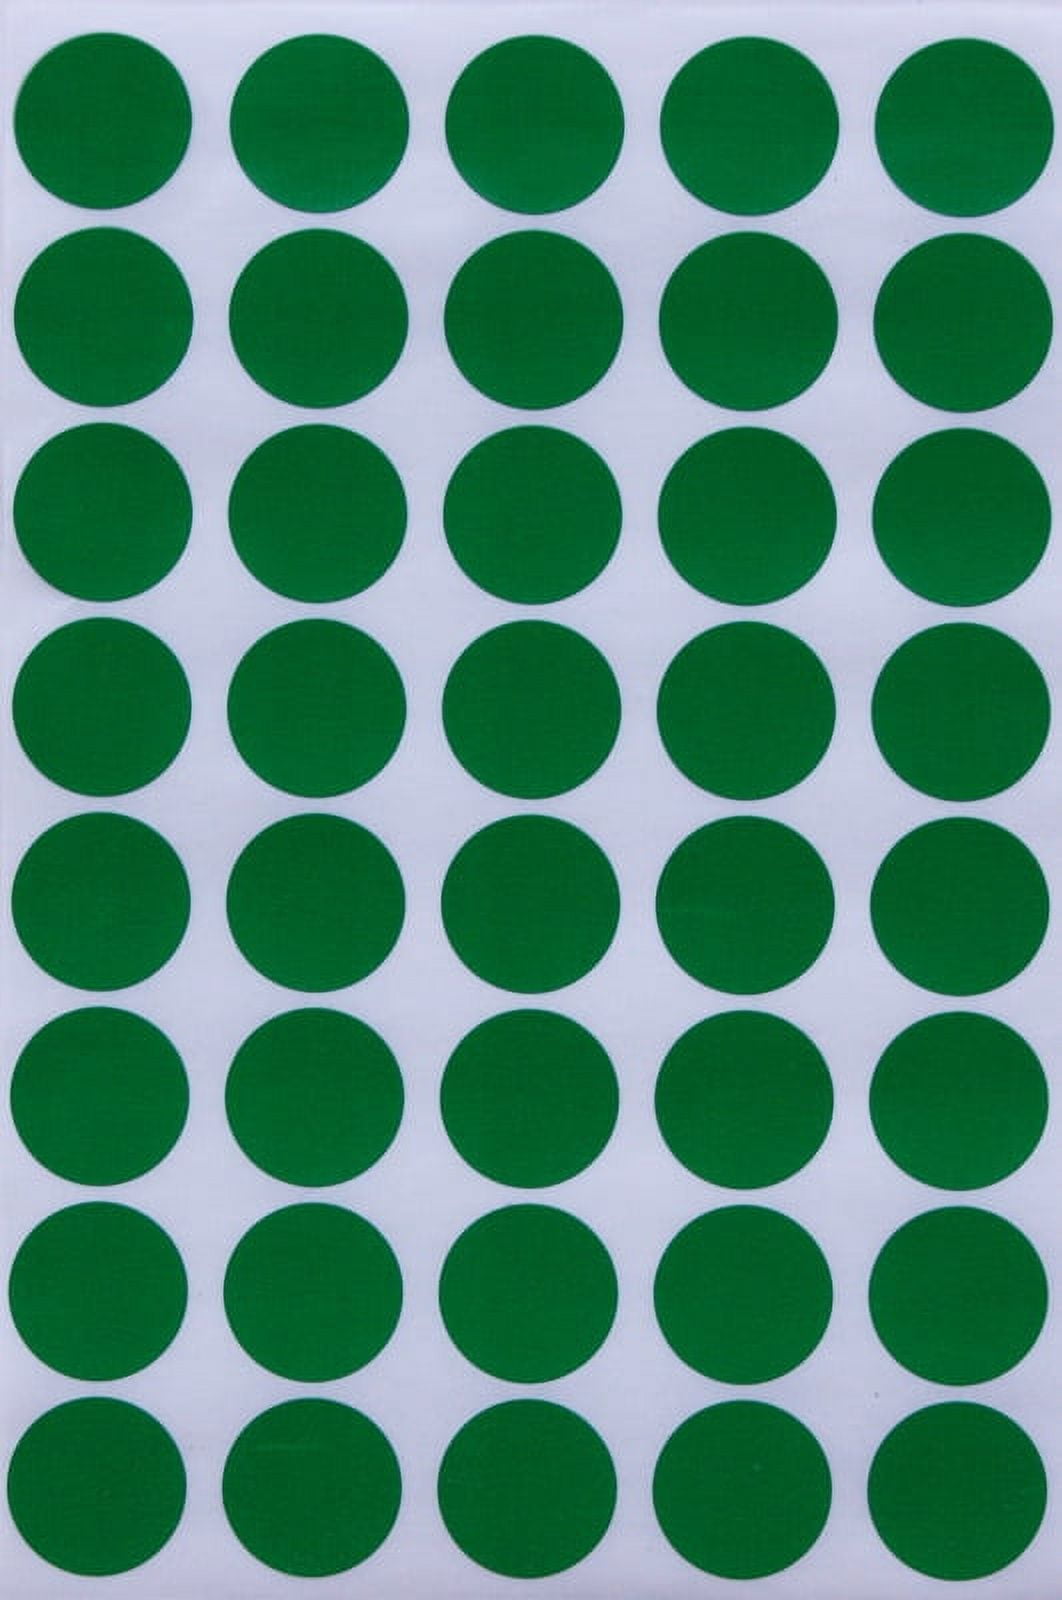 Round Stickers 3/4 inch, Colored Sticker Dots in Green 19mm - 1000 Pack by  Royal Green